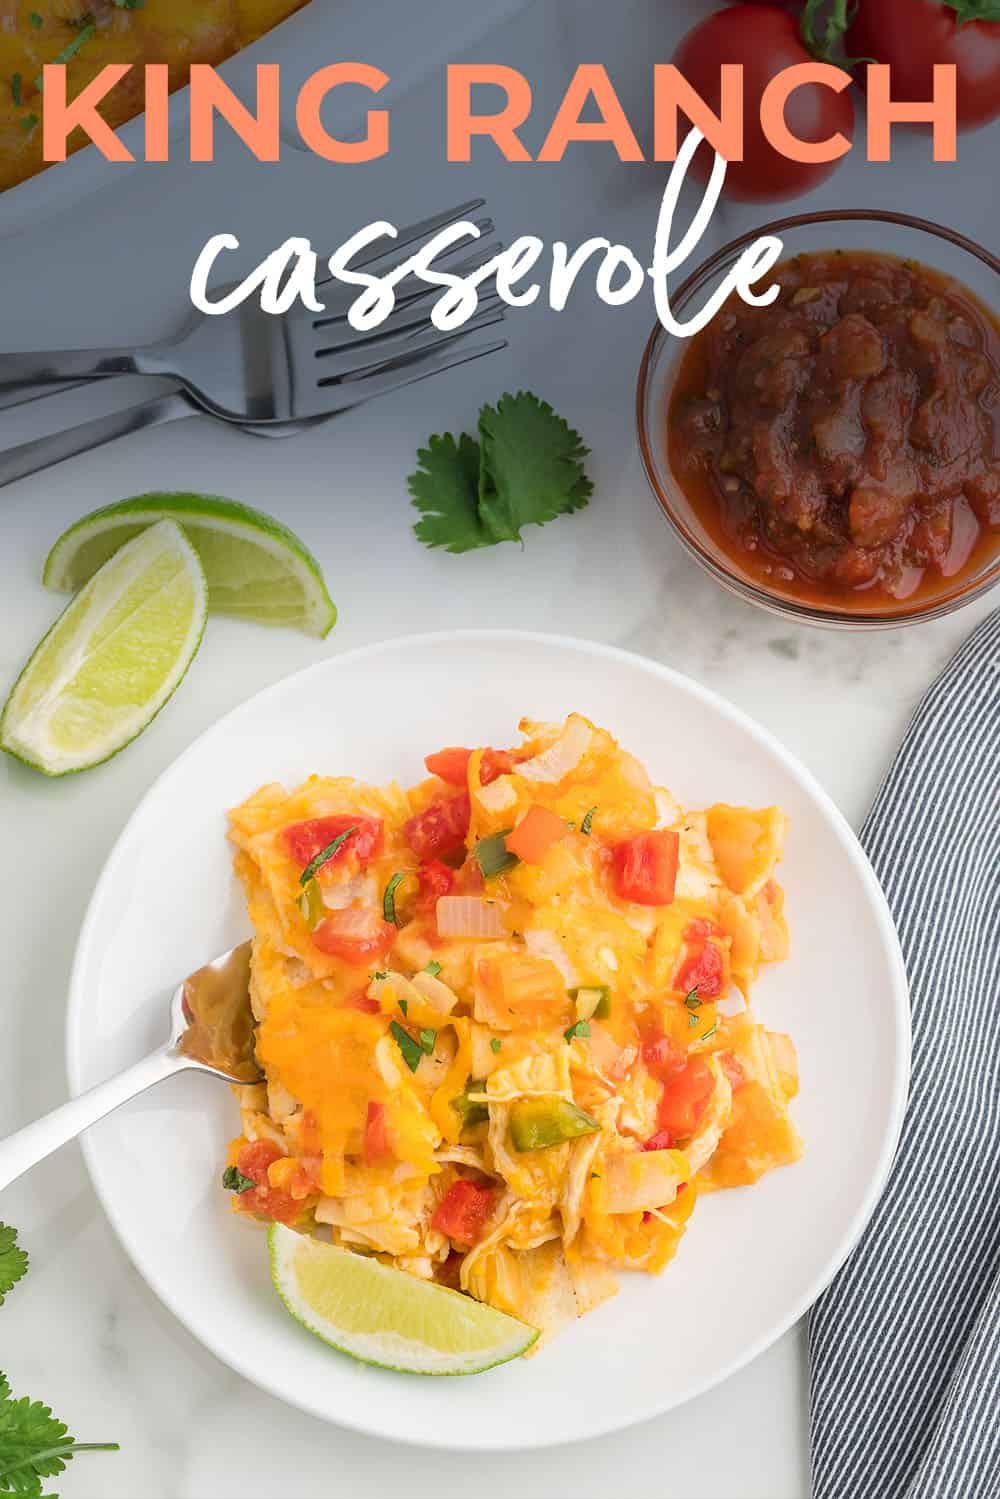 King Ranch Casserole on white plate with text for Pinterest.